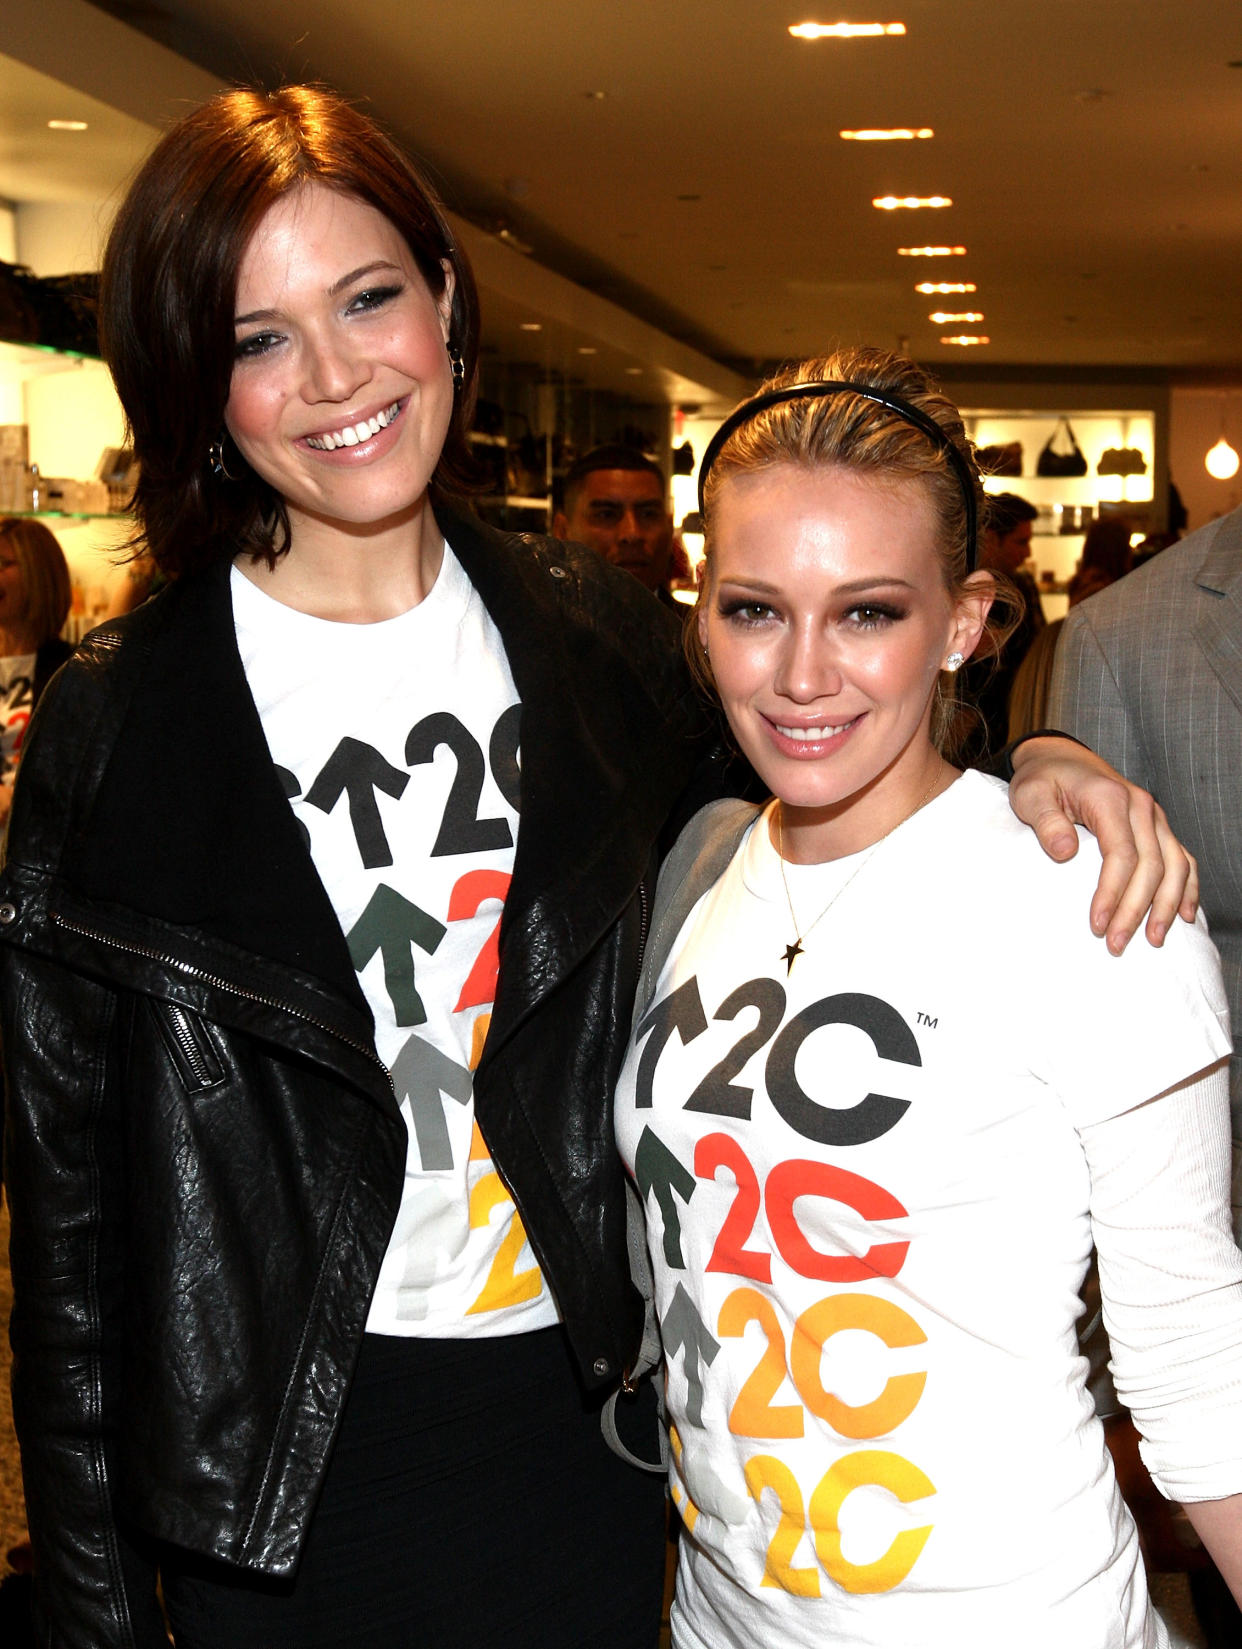 Mandy Moore and Hilary Duff (pictured in 2008) hosted a hangout for their newborn babies, August and Mae. (Photo: Alberto E. Rodriguez/Getty Images)